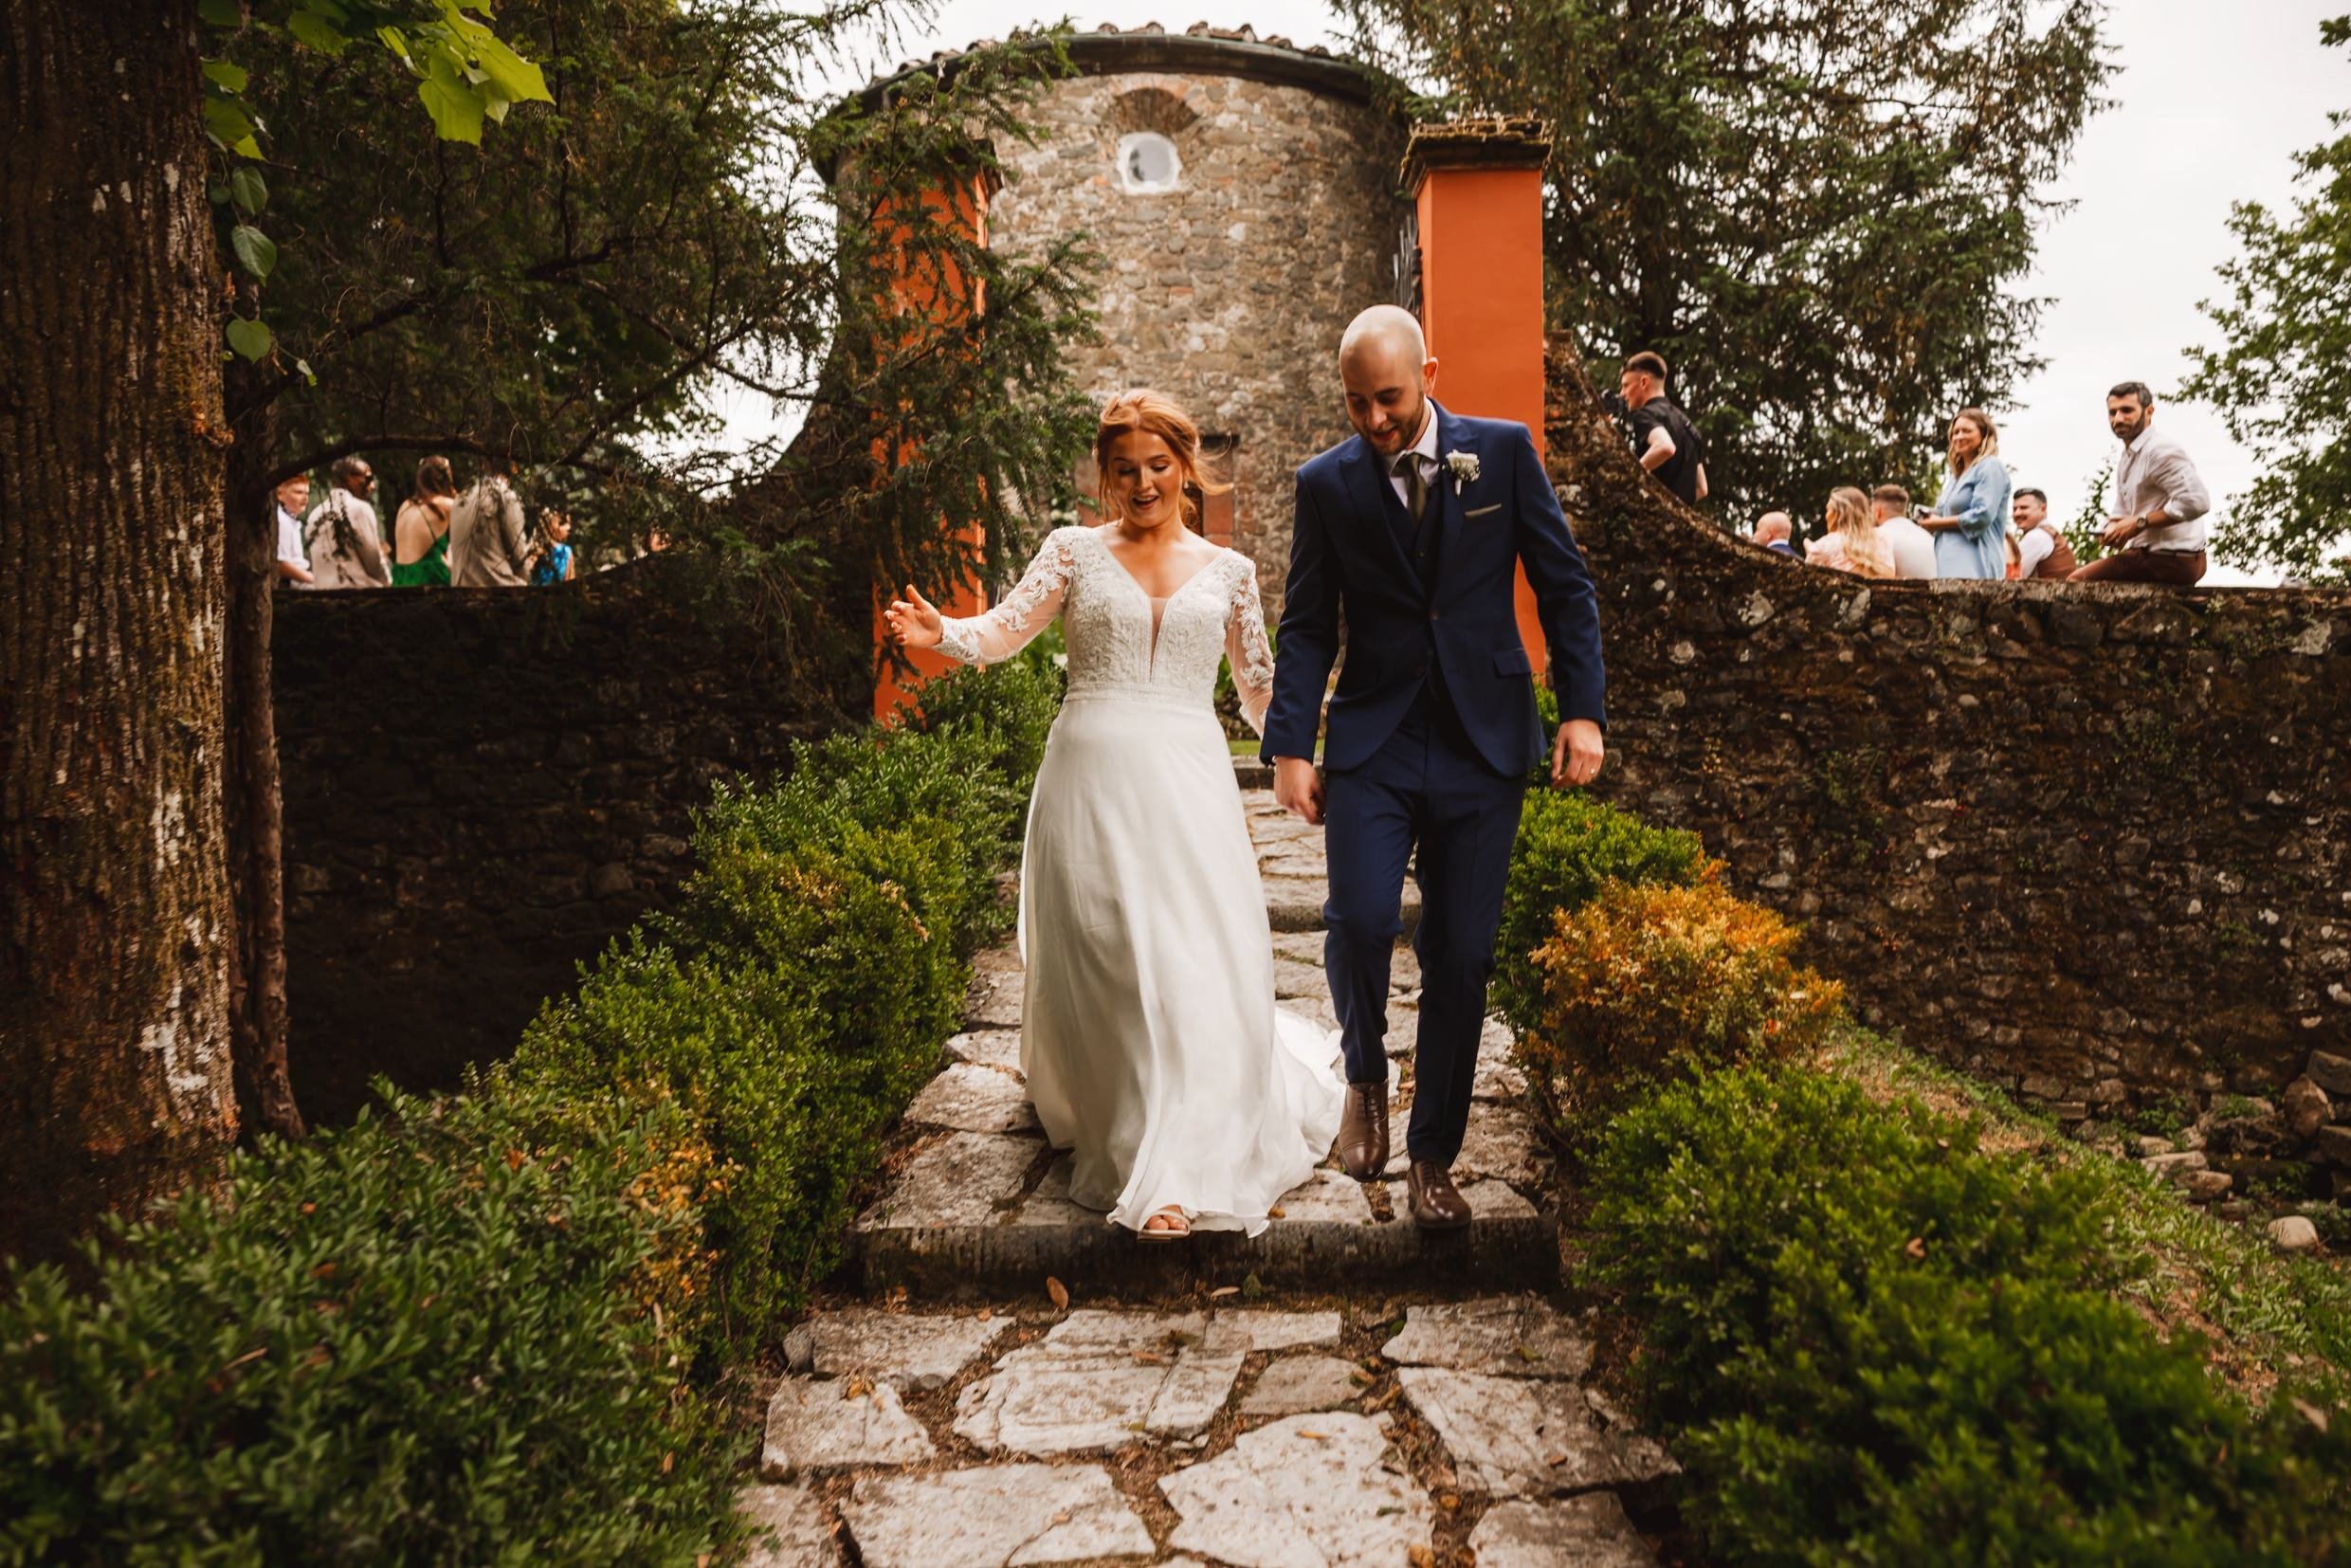 the bride and groom leaving the private chapel following their wedding ceremony at the agriturismo la torre italian destination wedding venue in bagni di lucca tuscany